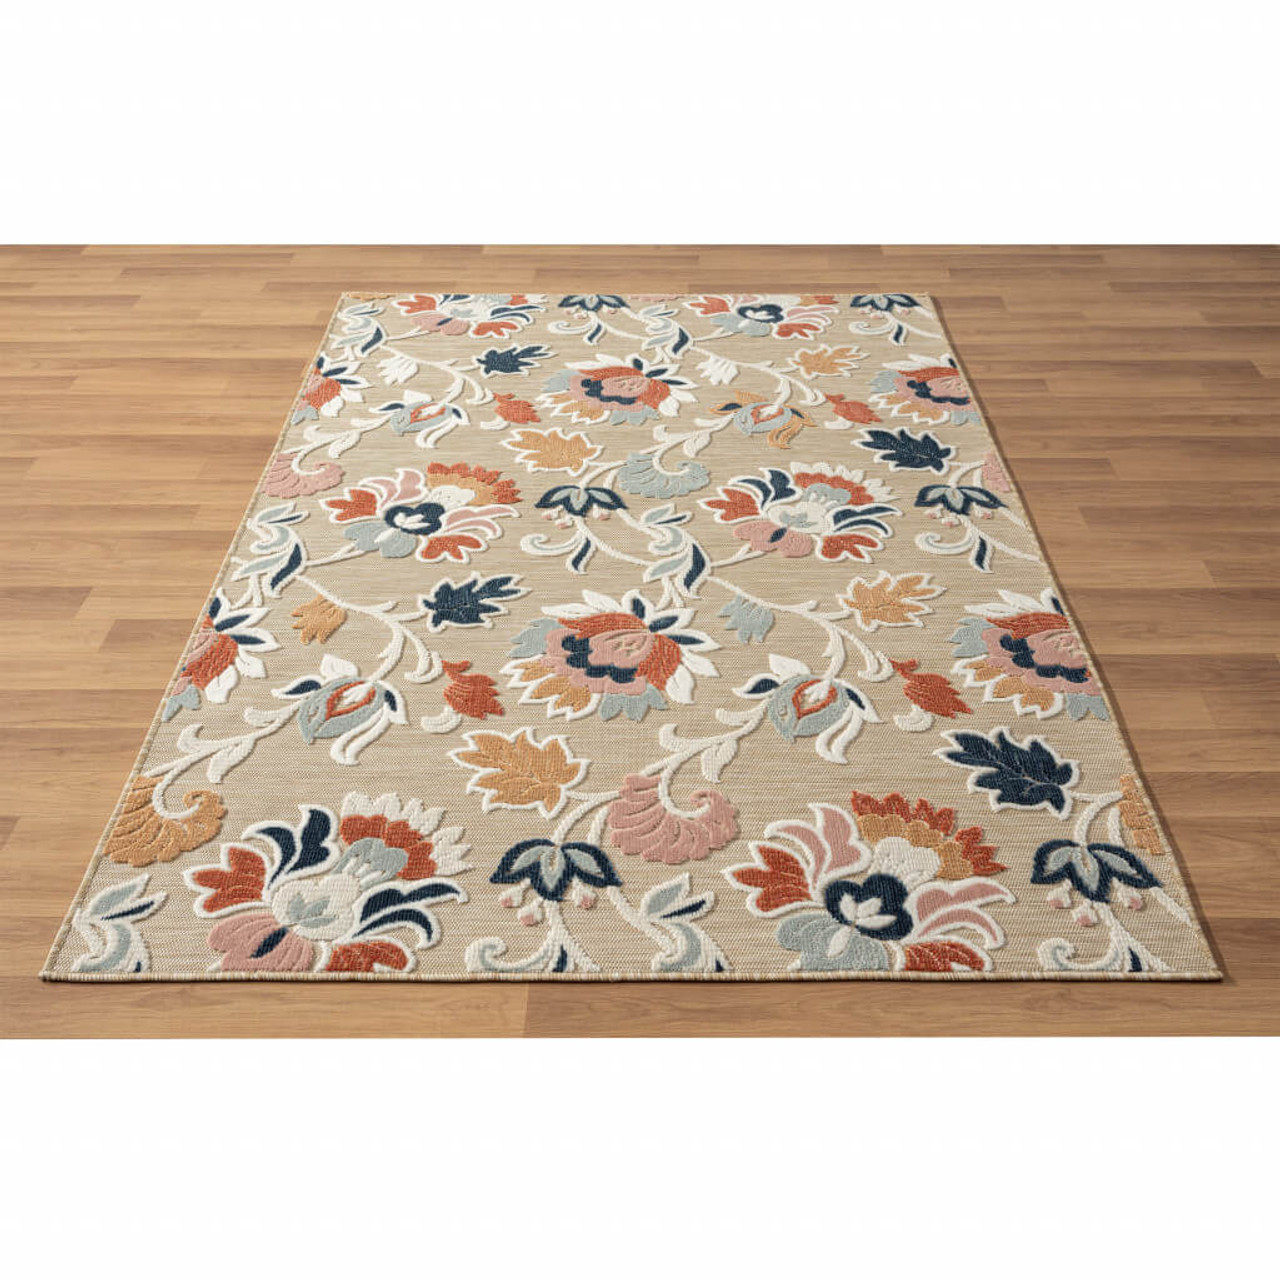 5' X 7' Blue And Beige Floral Stain Resistant Indoor Outdoor Area Rug